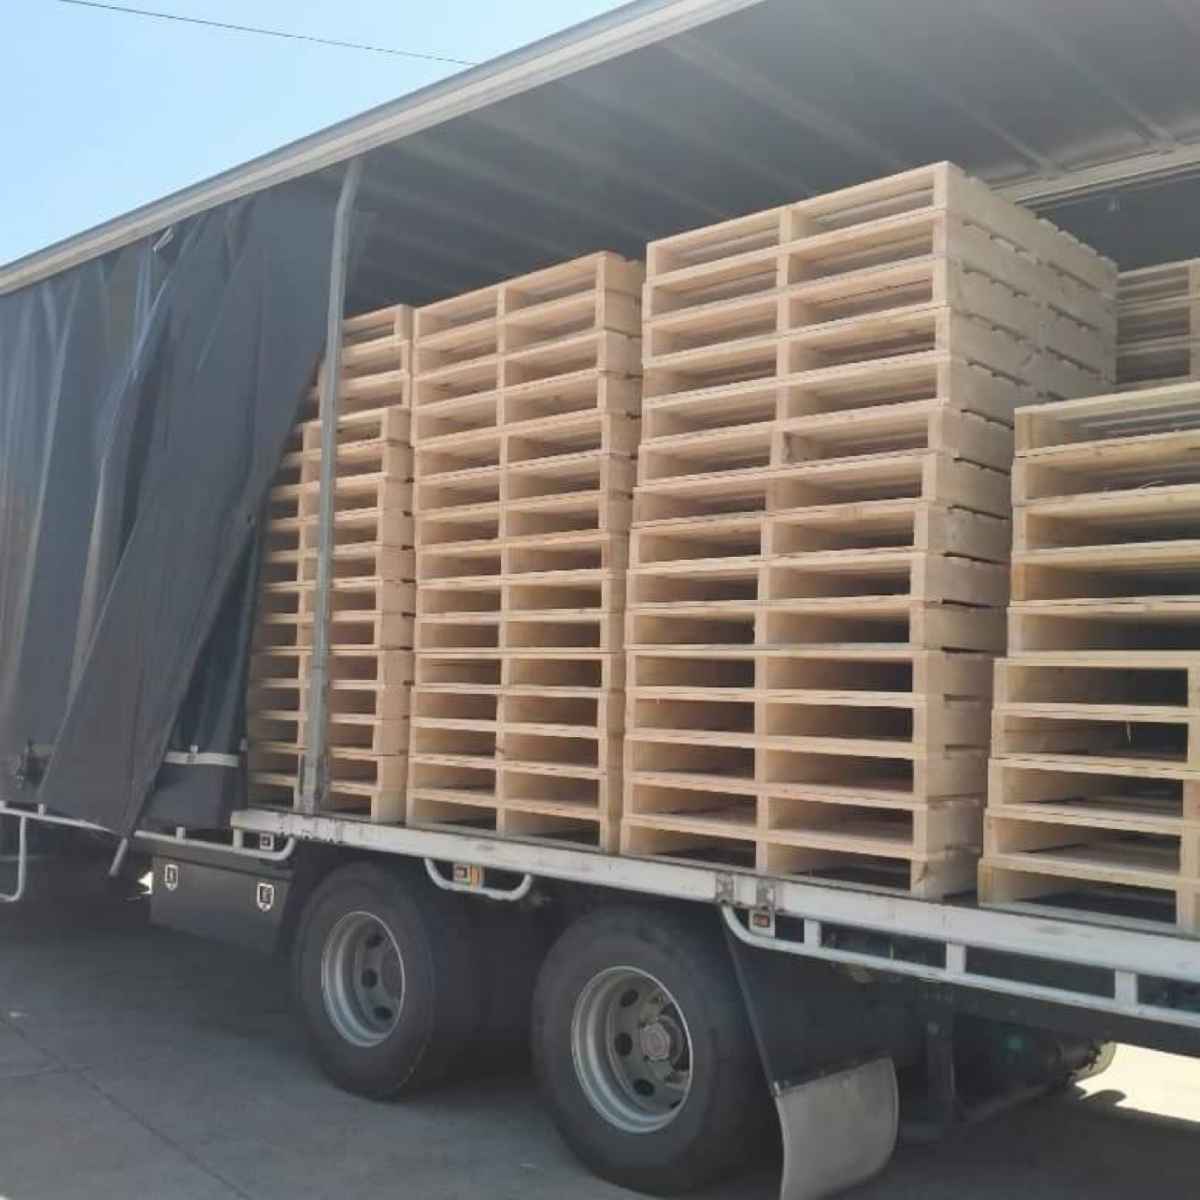 pallets loaded into a truck